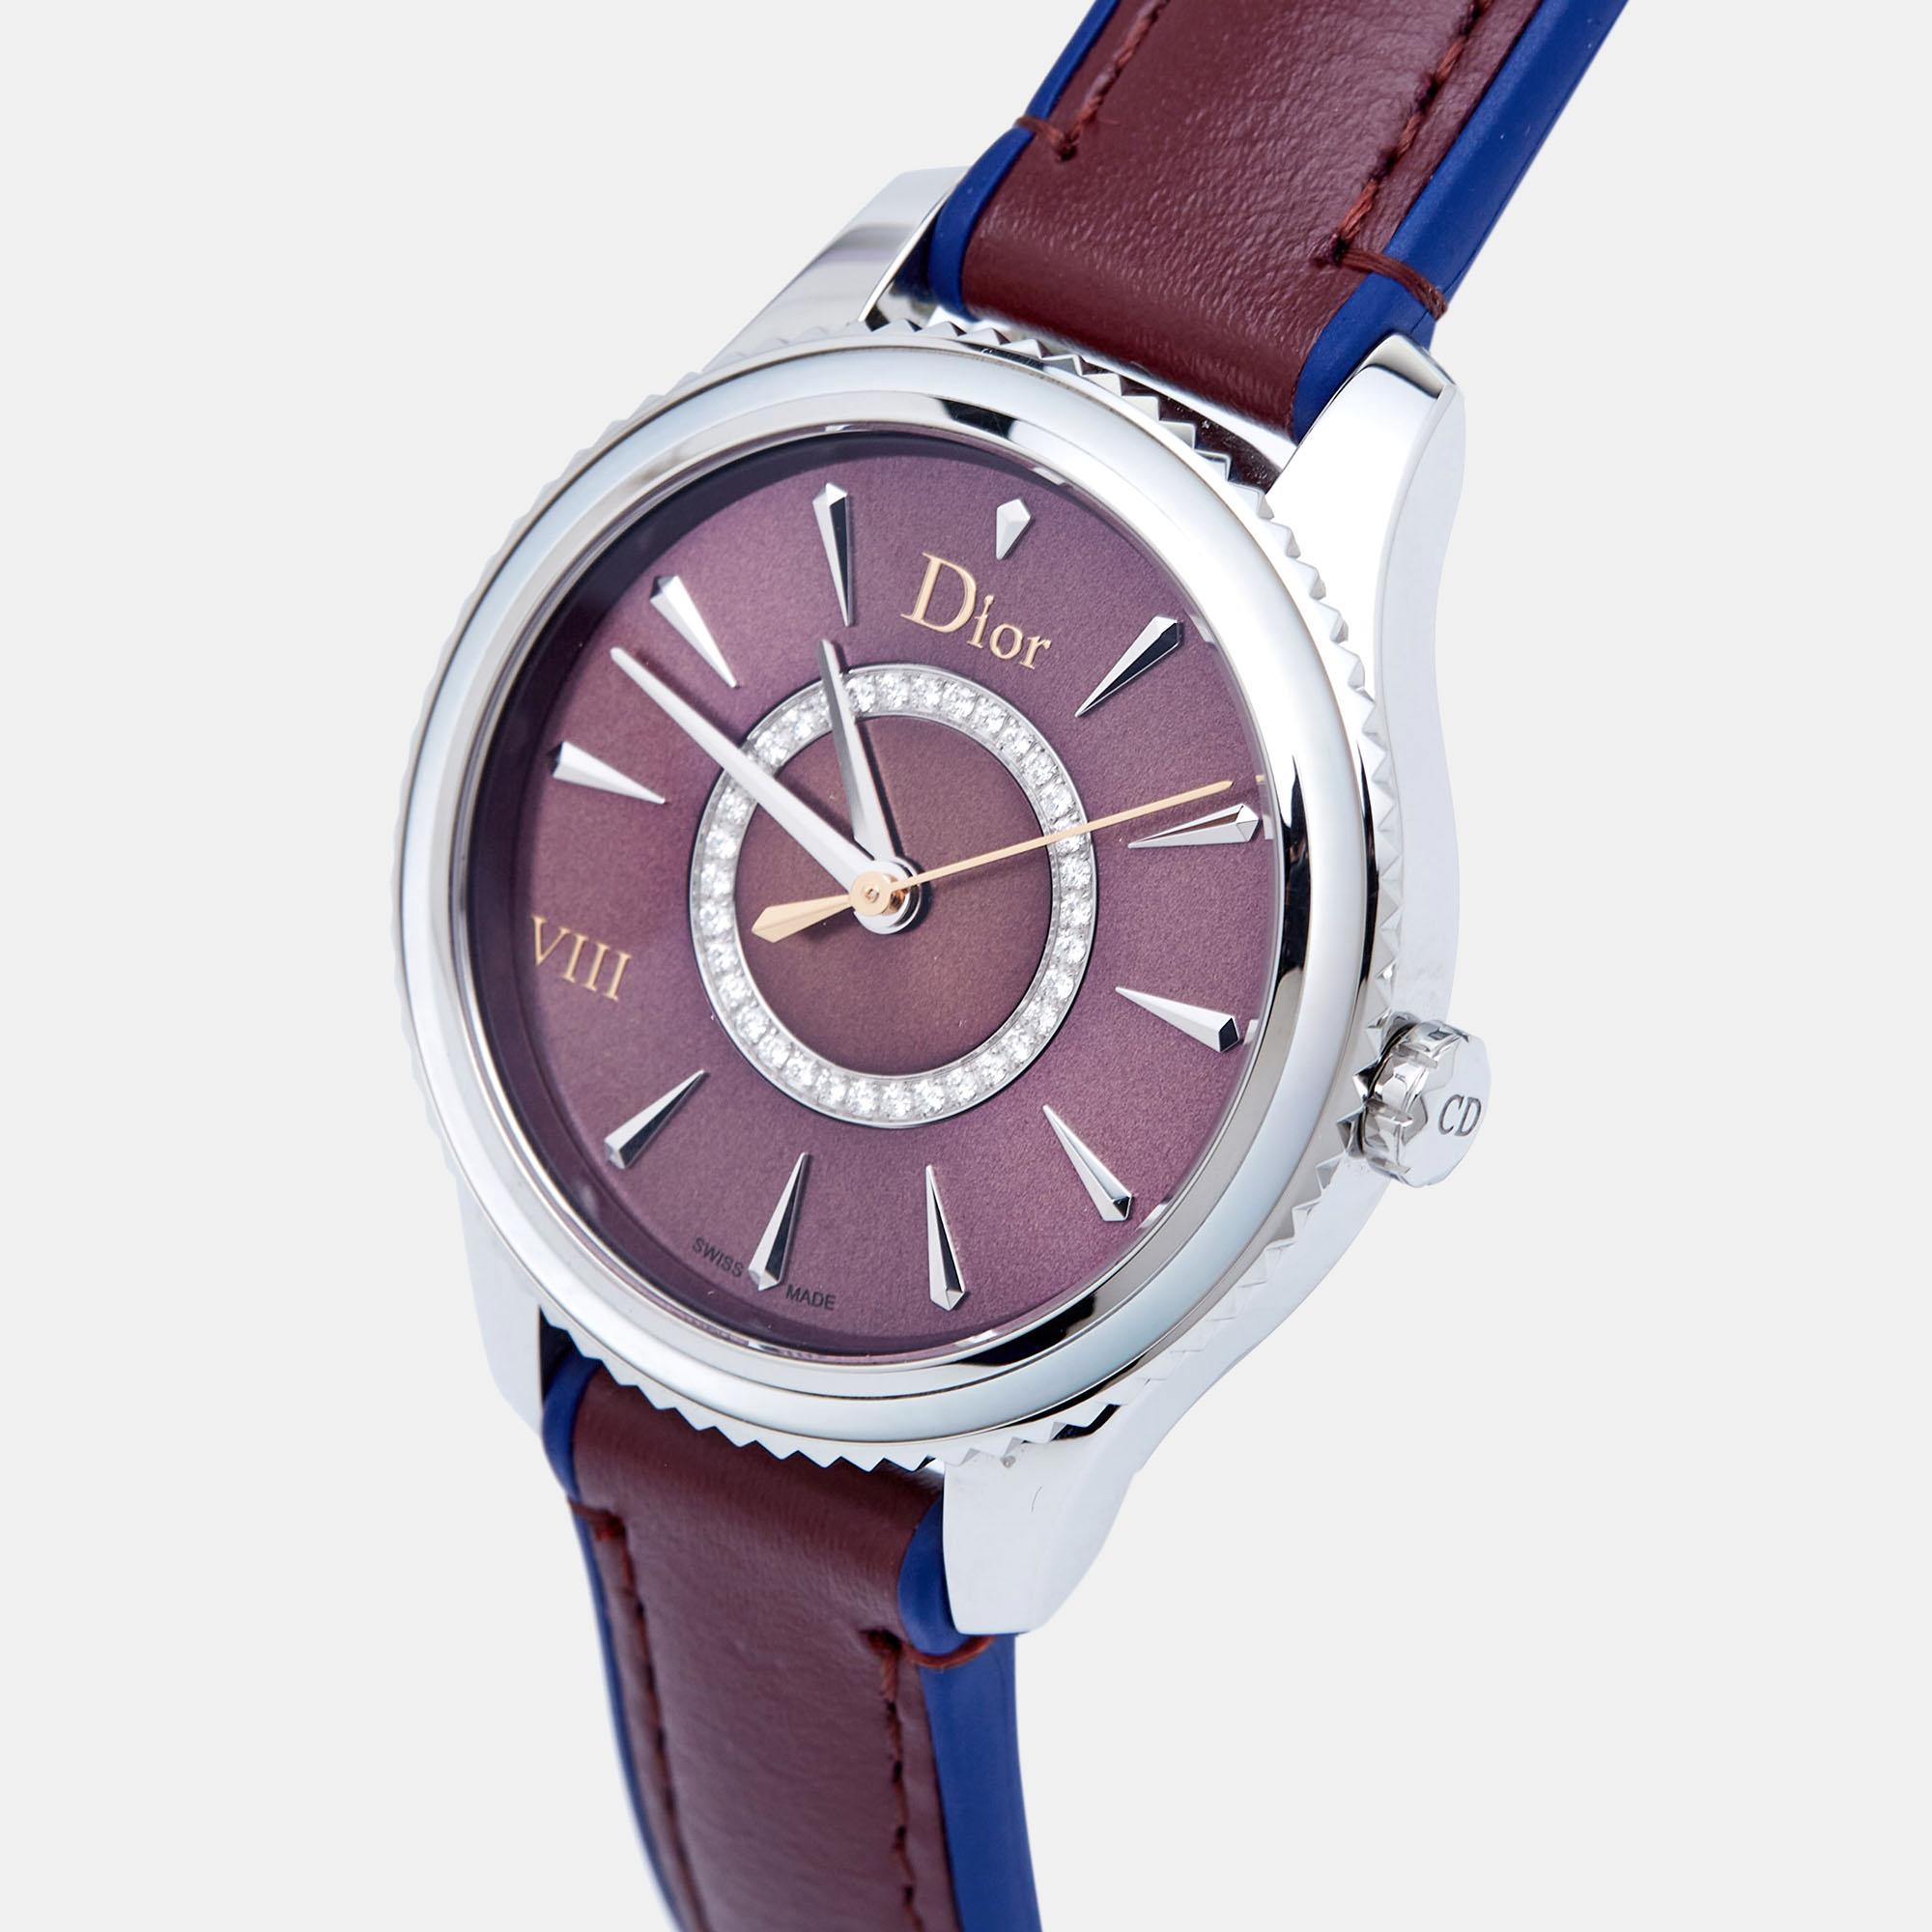 Embrace timeless luxury with the Dior wristwatch. Crafted with precision, this exquisite timepiece combines stainless steel and leather seamlessly, exuding sophistication and grace. The deep burgundy hue of the dial, adorned with shimmering